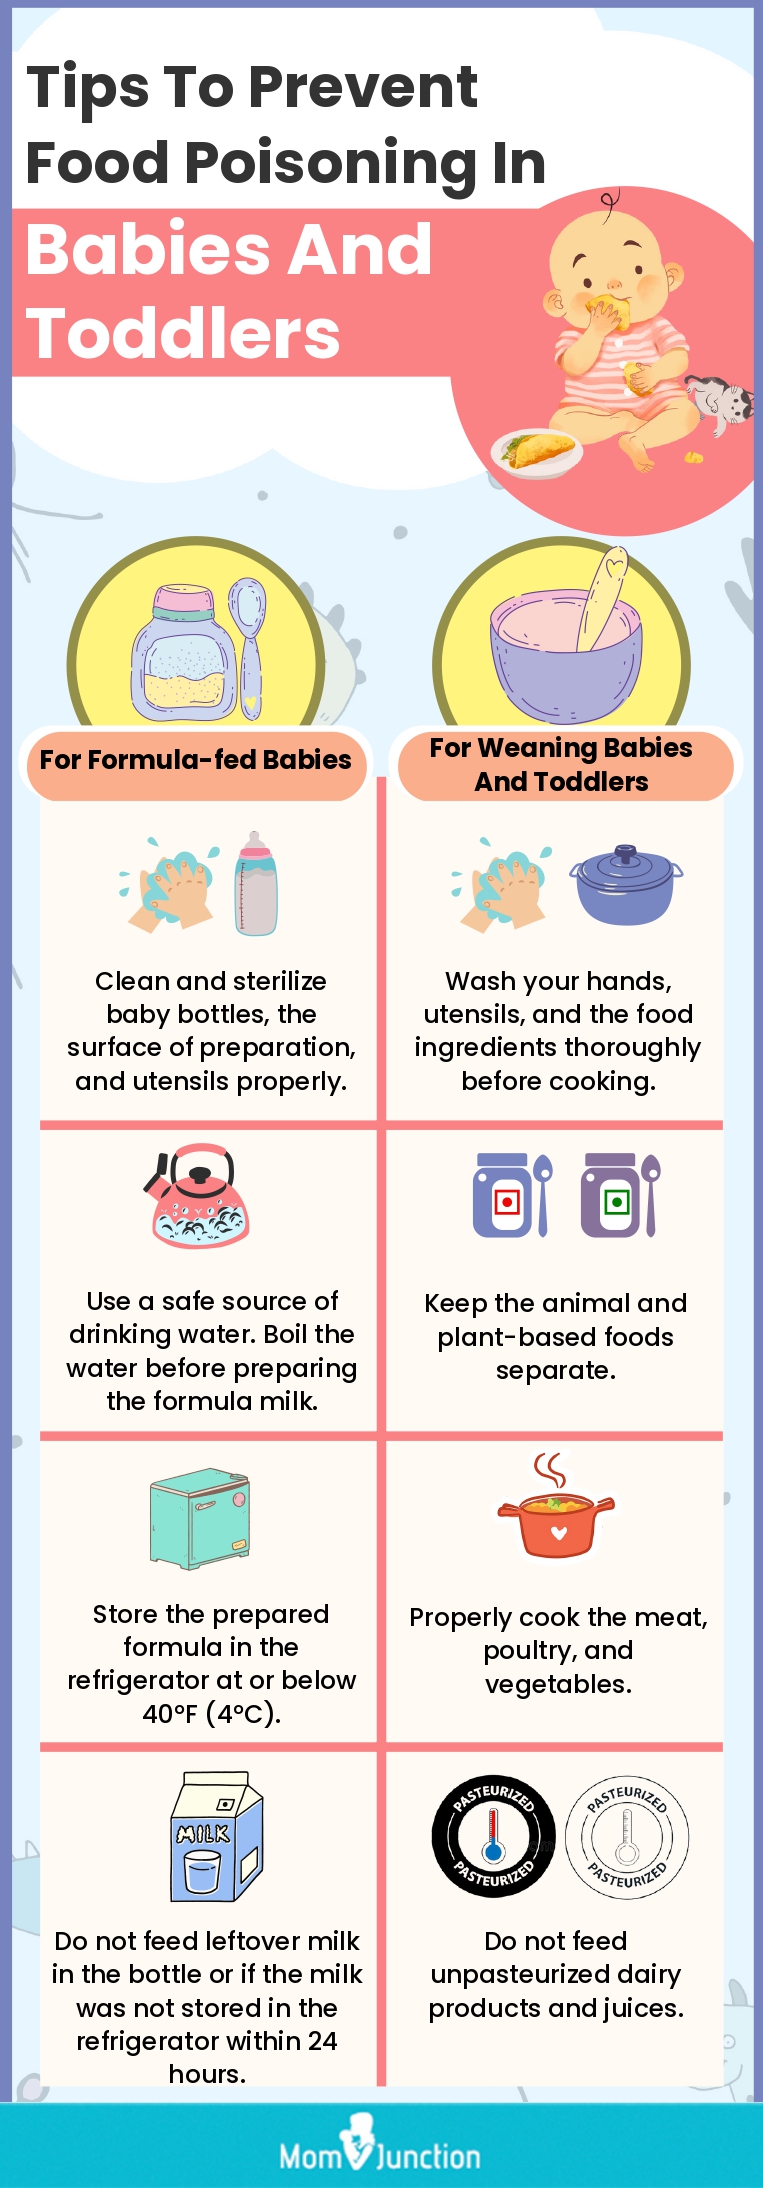 https://cdn2.momjunction.com/wp-content/uploads/2023/05/Tips-To-Prevent-Food-Poisoning-In-Babies-And-Toddlers.jpg